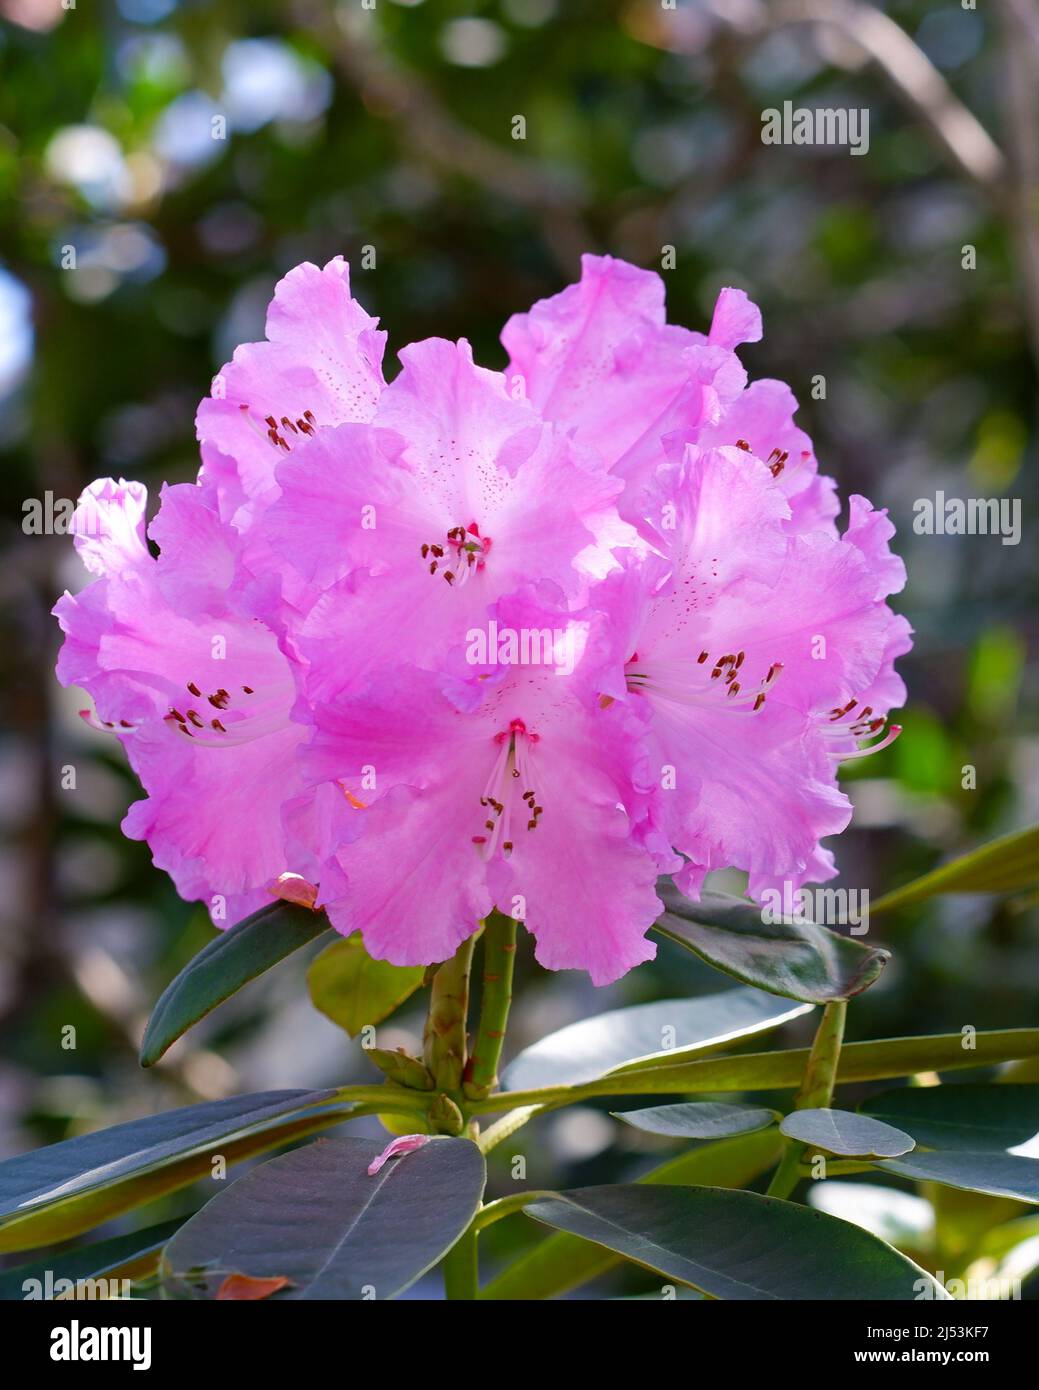 Pink rhododendron flowers in the garden. Close-up of a rhododendron inflorescence with pink flowers. Beautiful flowering shrub. Stock Photo